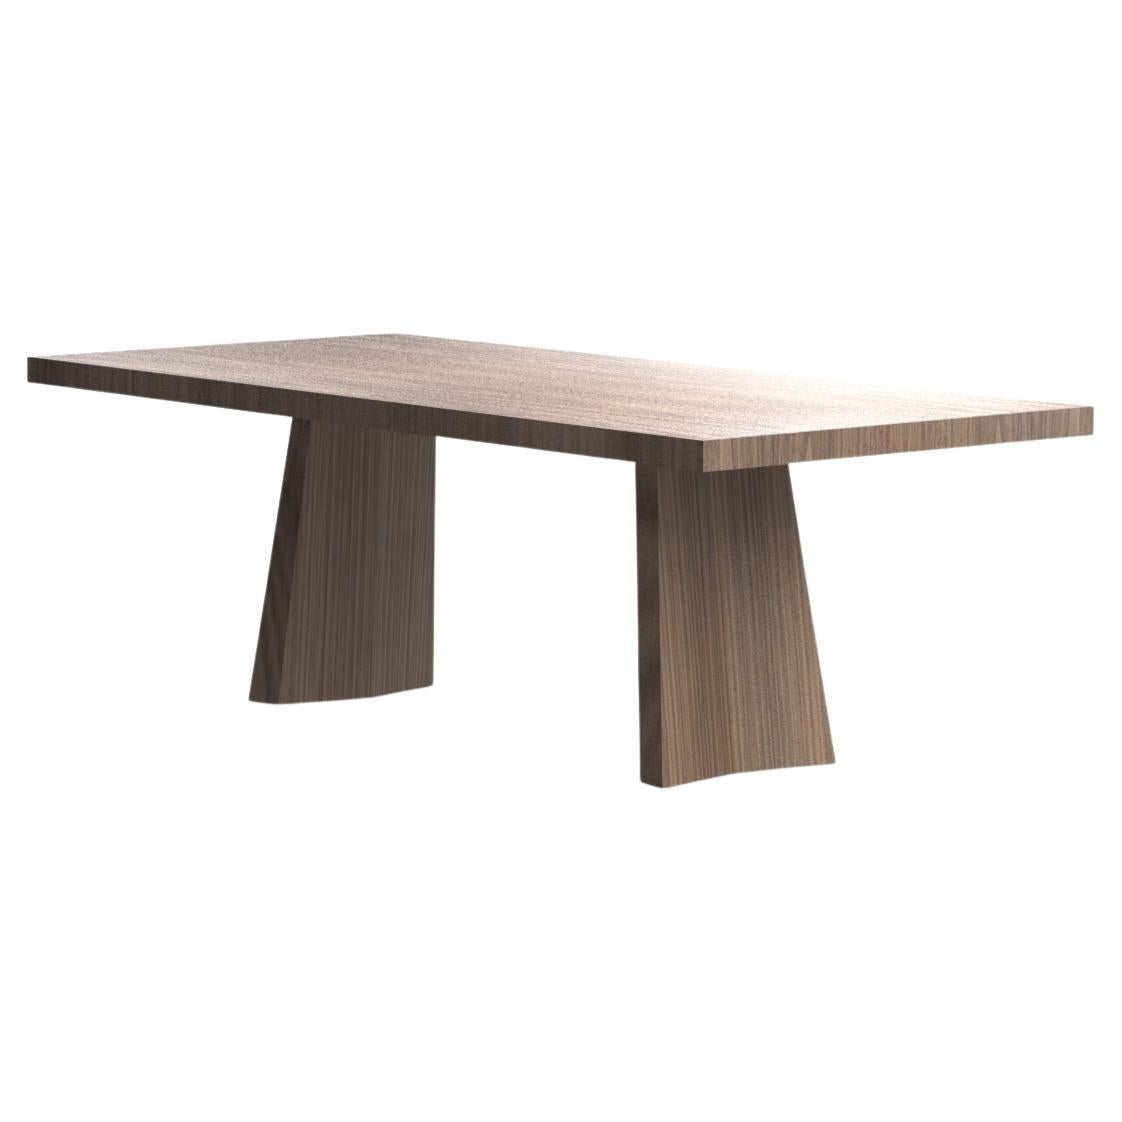 Cliff Young Cubisto ii Self-Storing Extension Dining Room Table For Sale